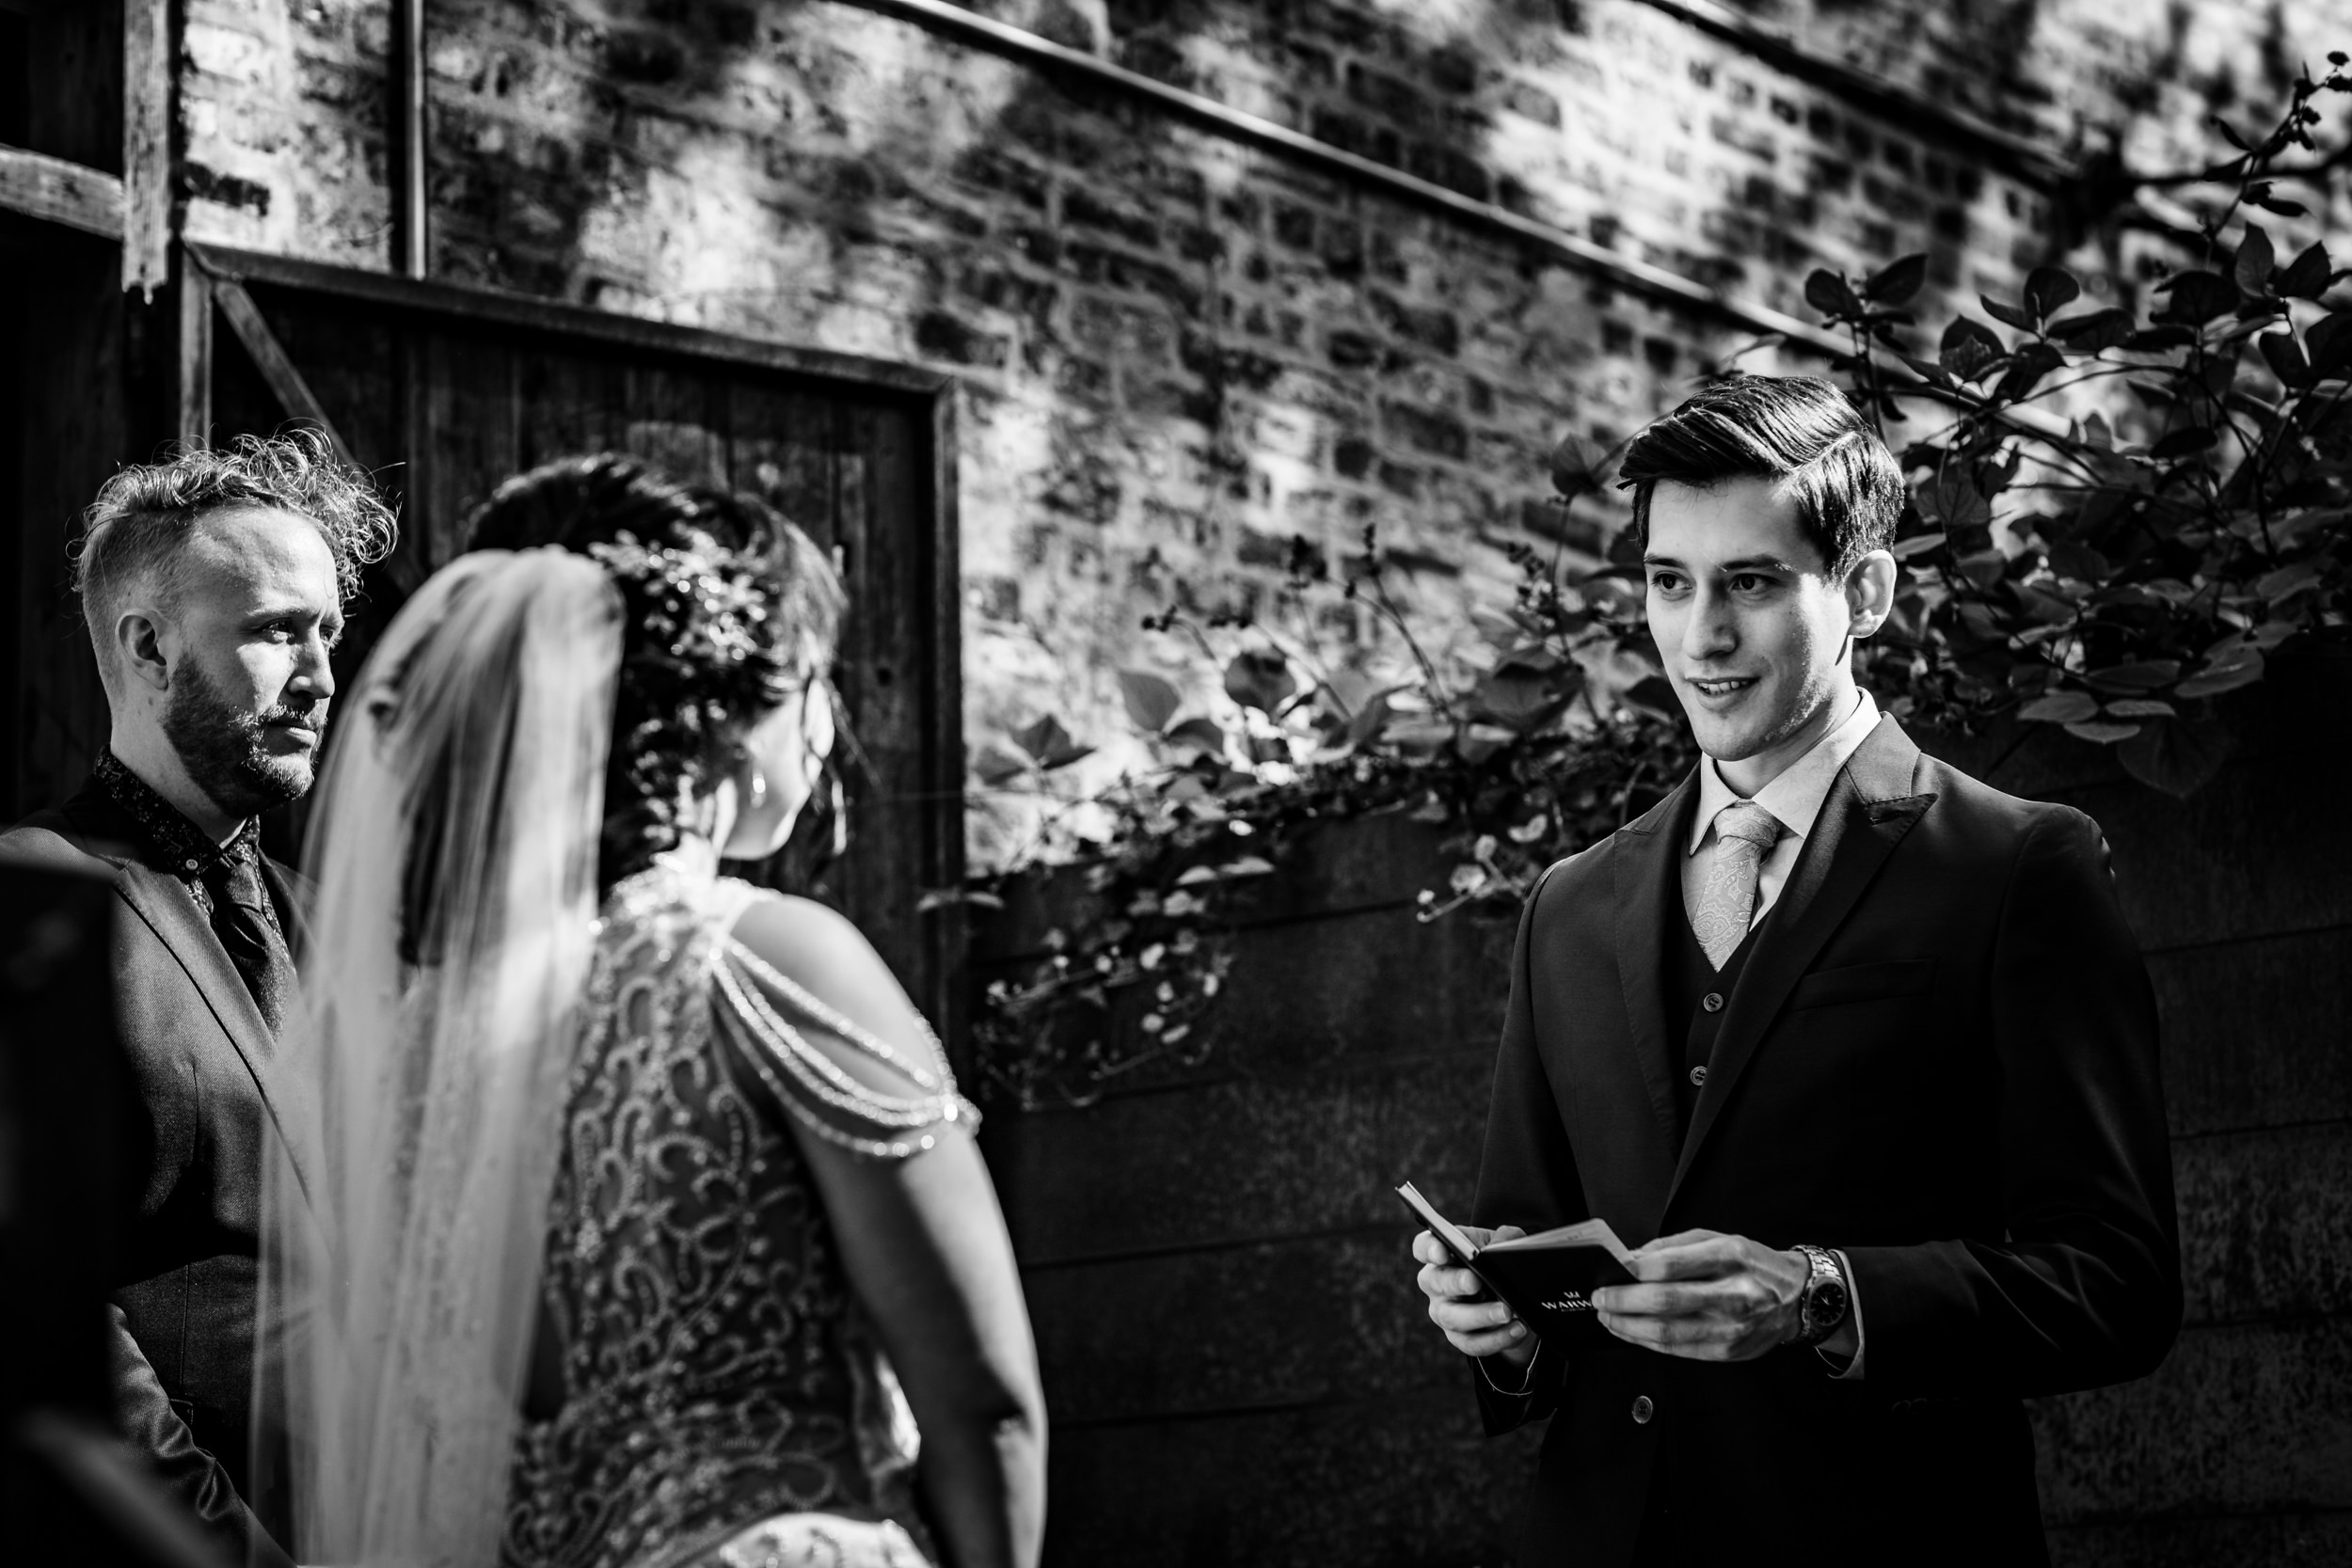 A groom shares his views during a wedding at the Joinery in Chicago.